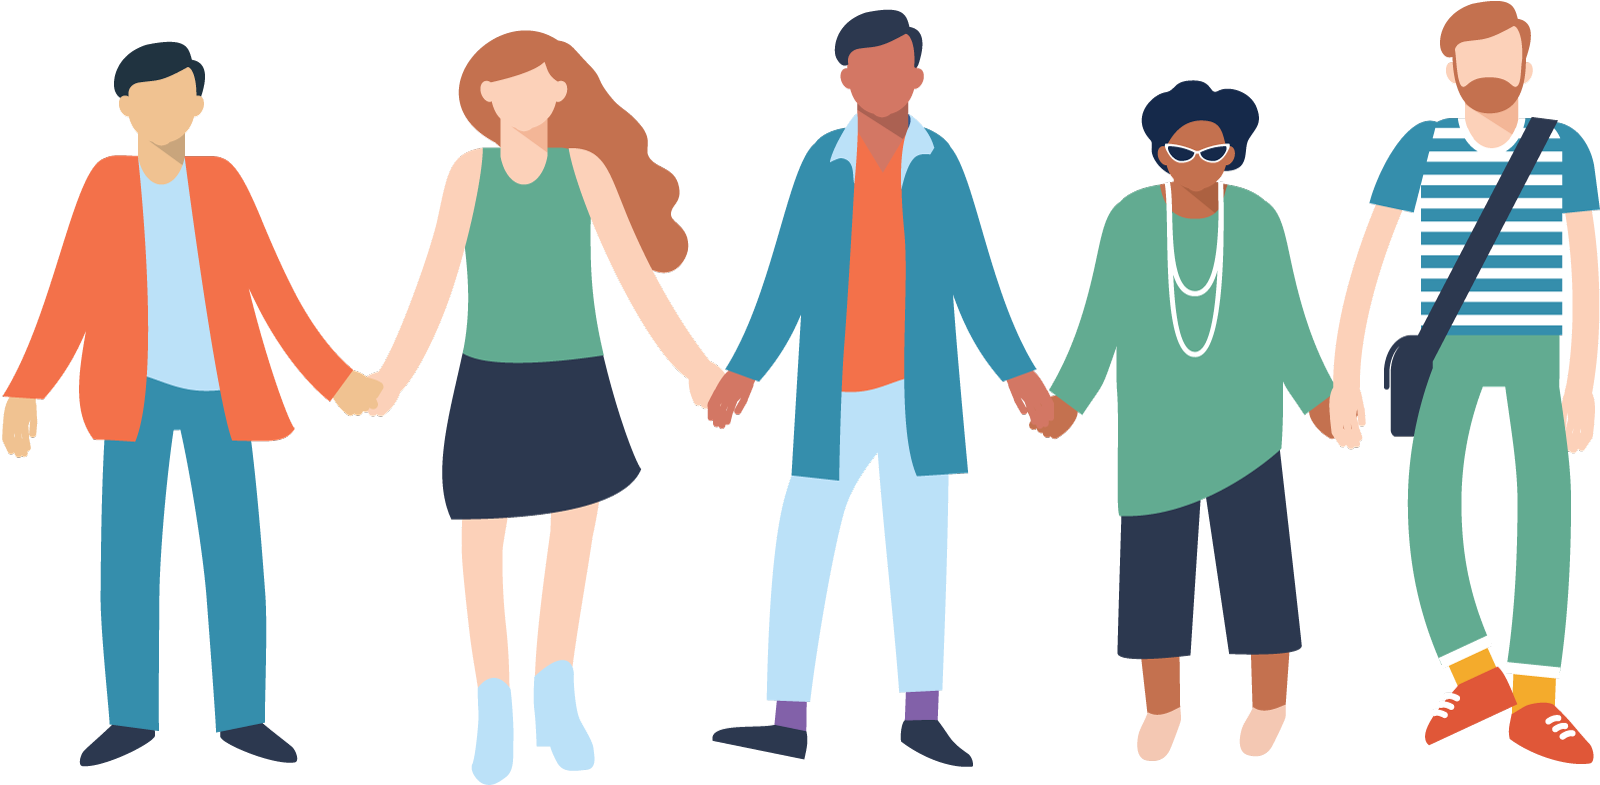 Illustration of five people holding hands